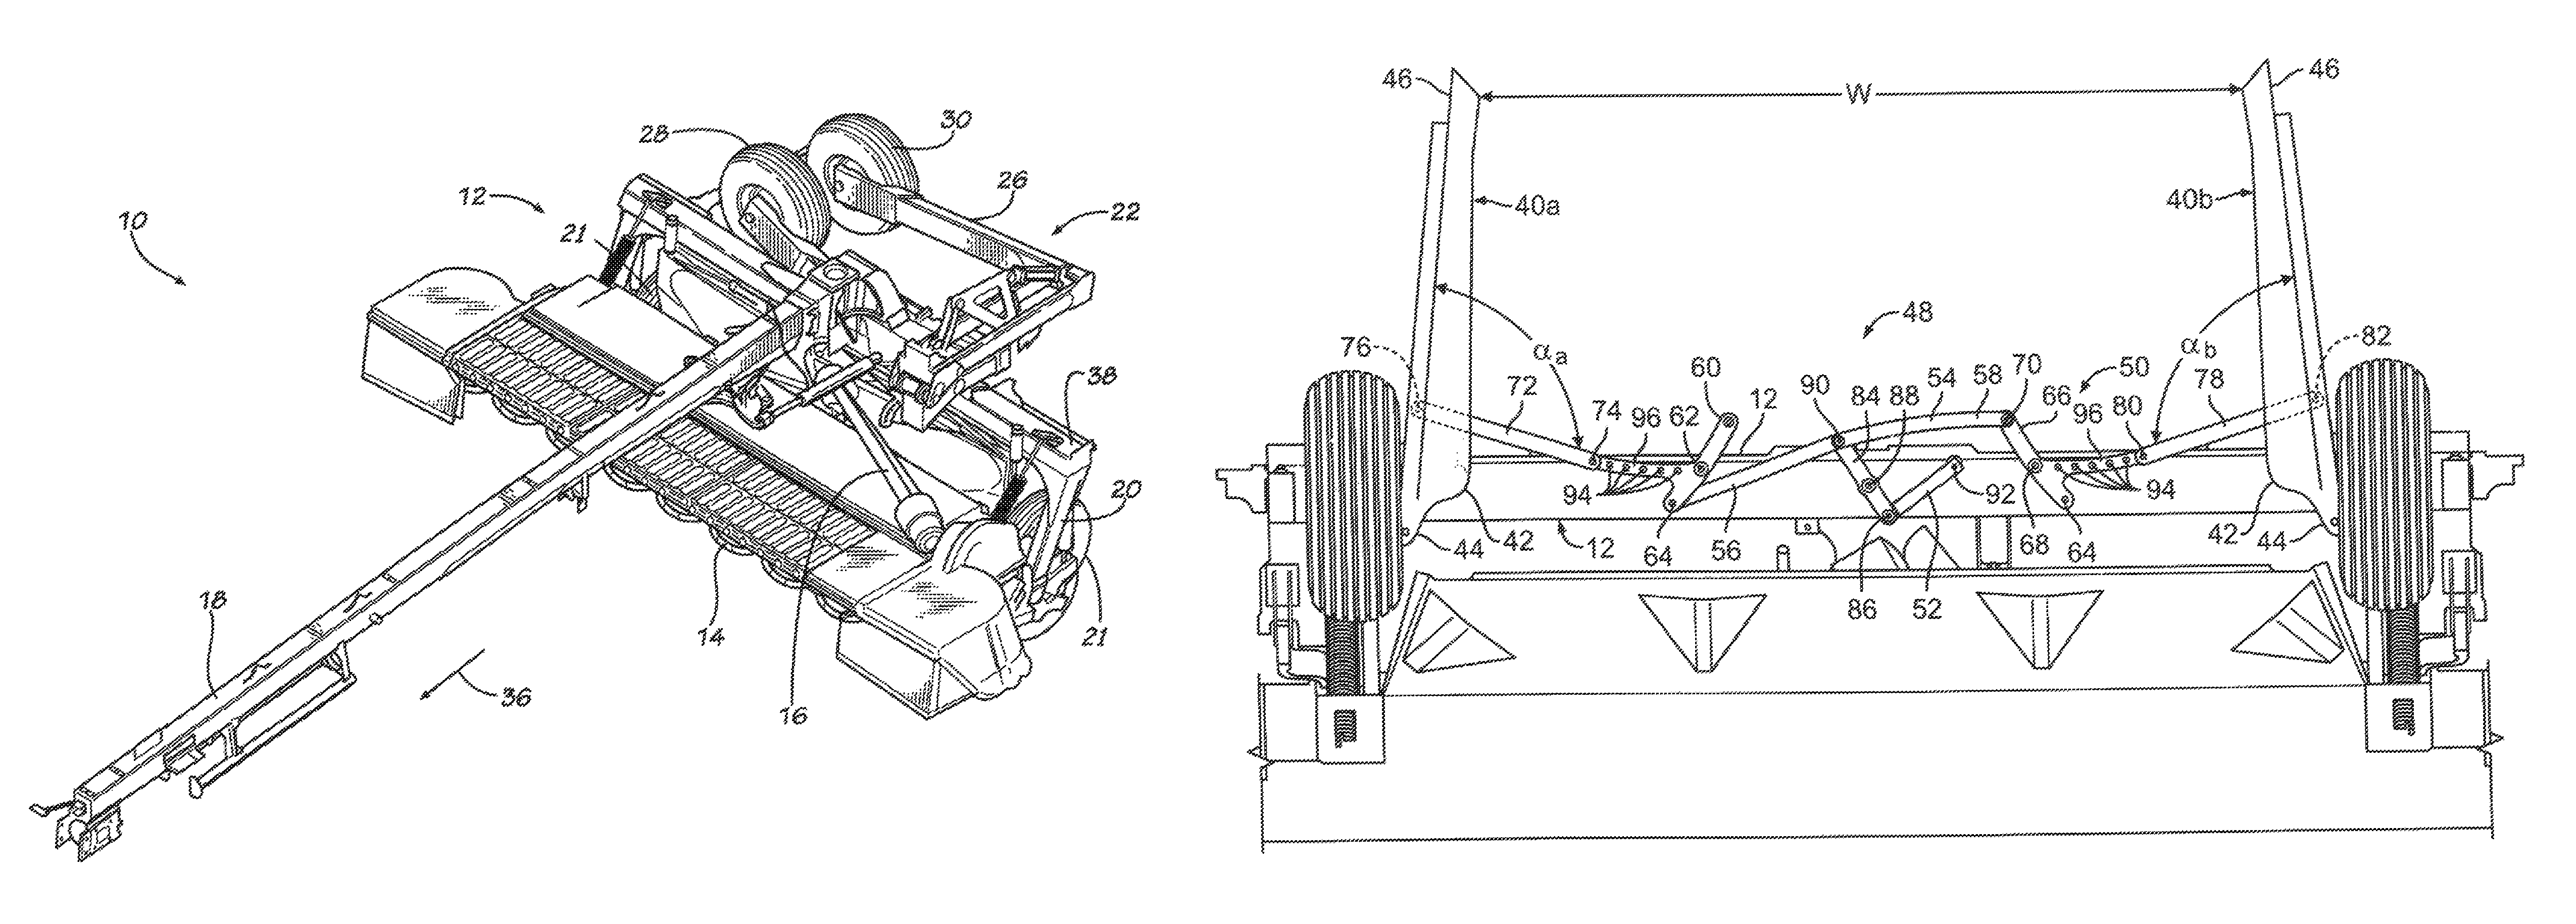 Windrow shield control system for a header of an agricultural harvester